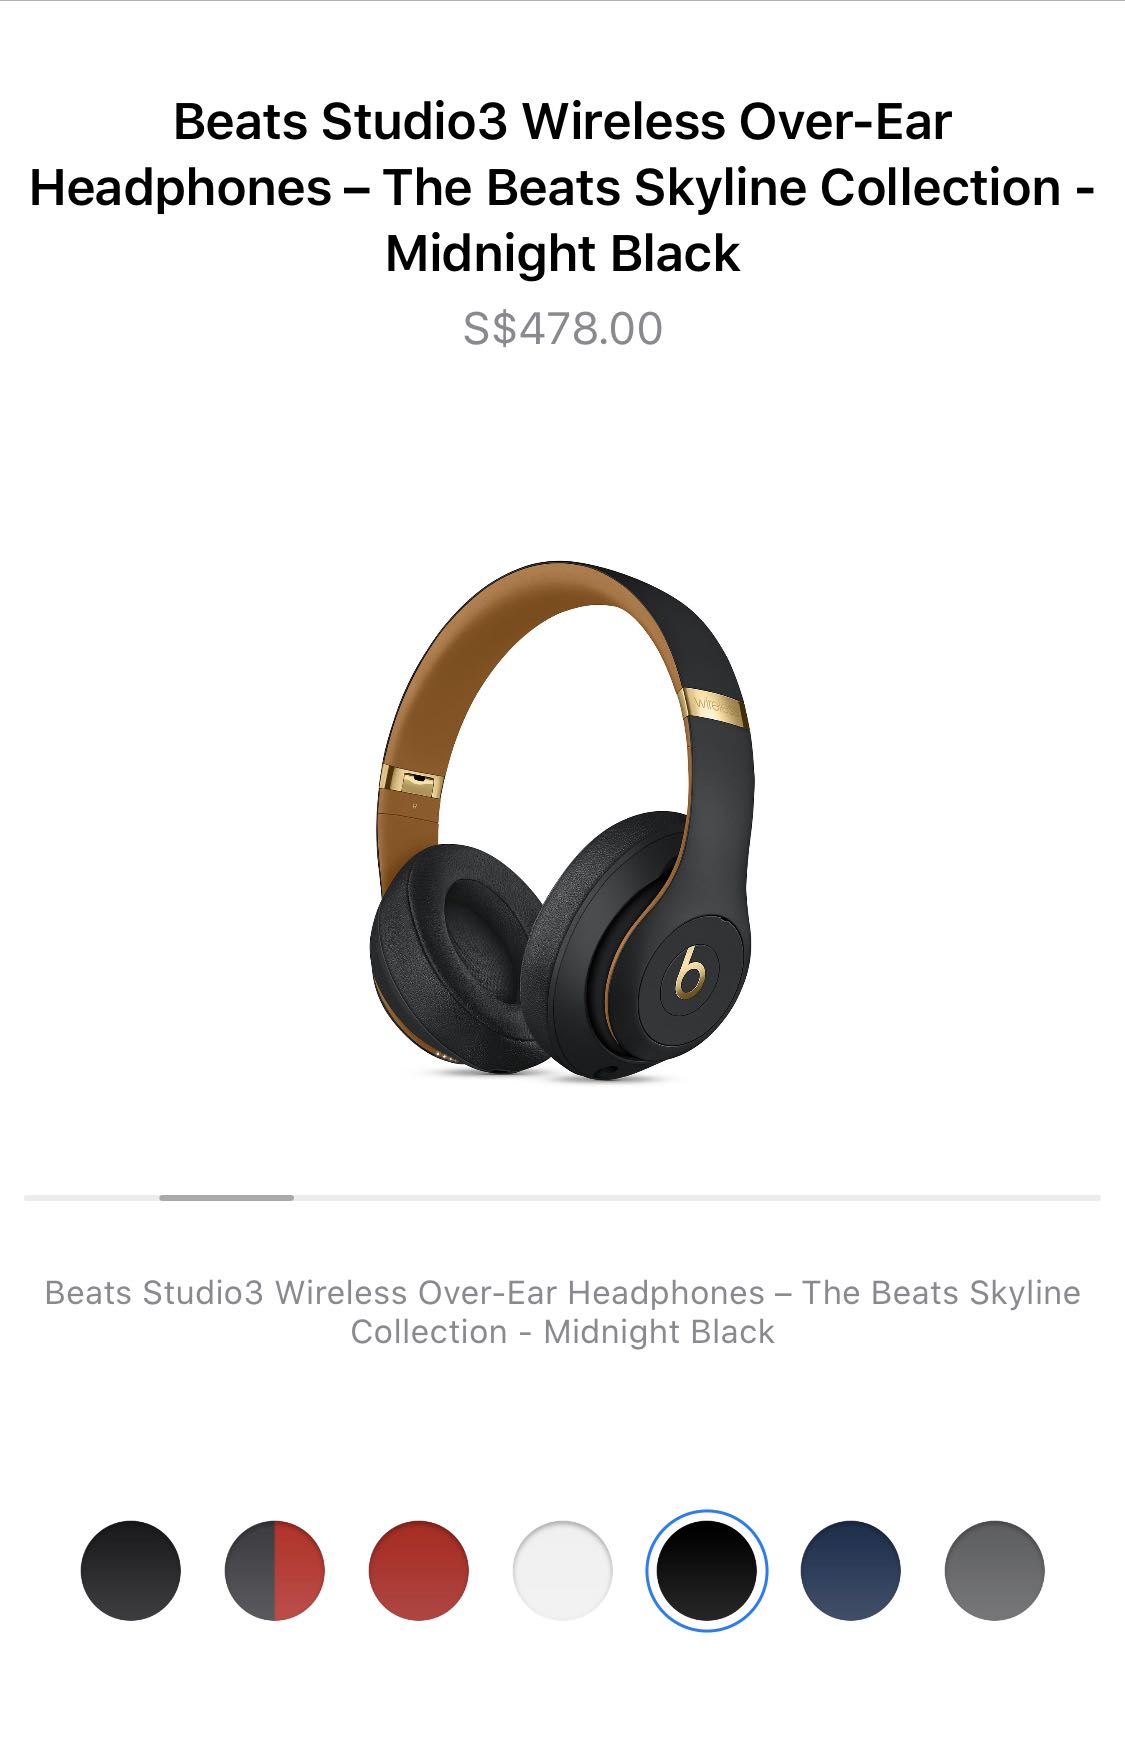 what is the beats skyline collection